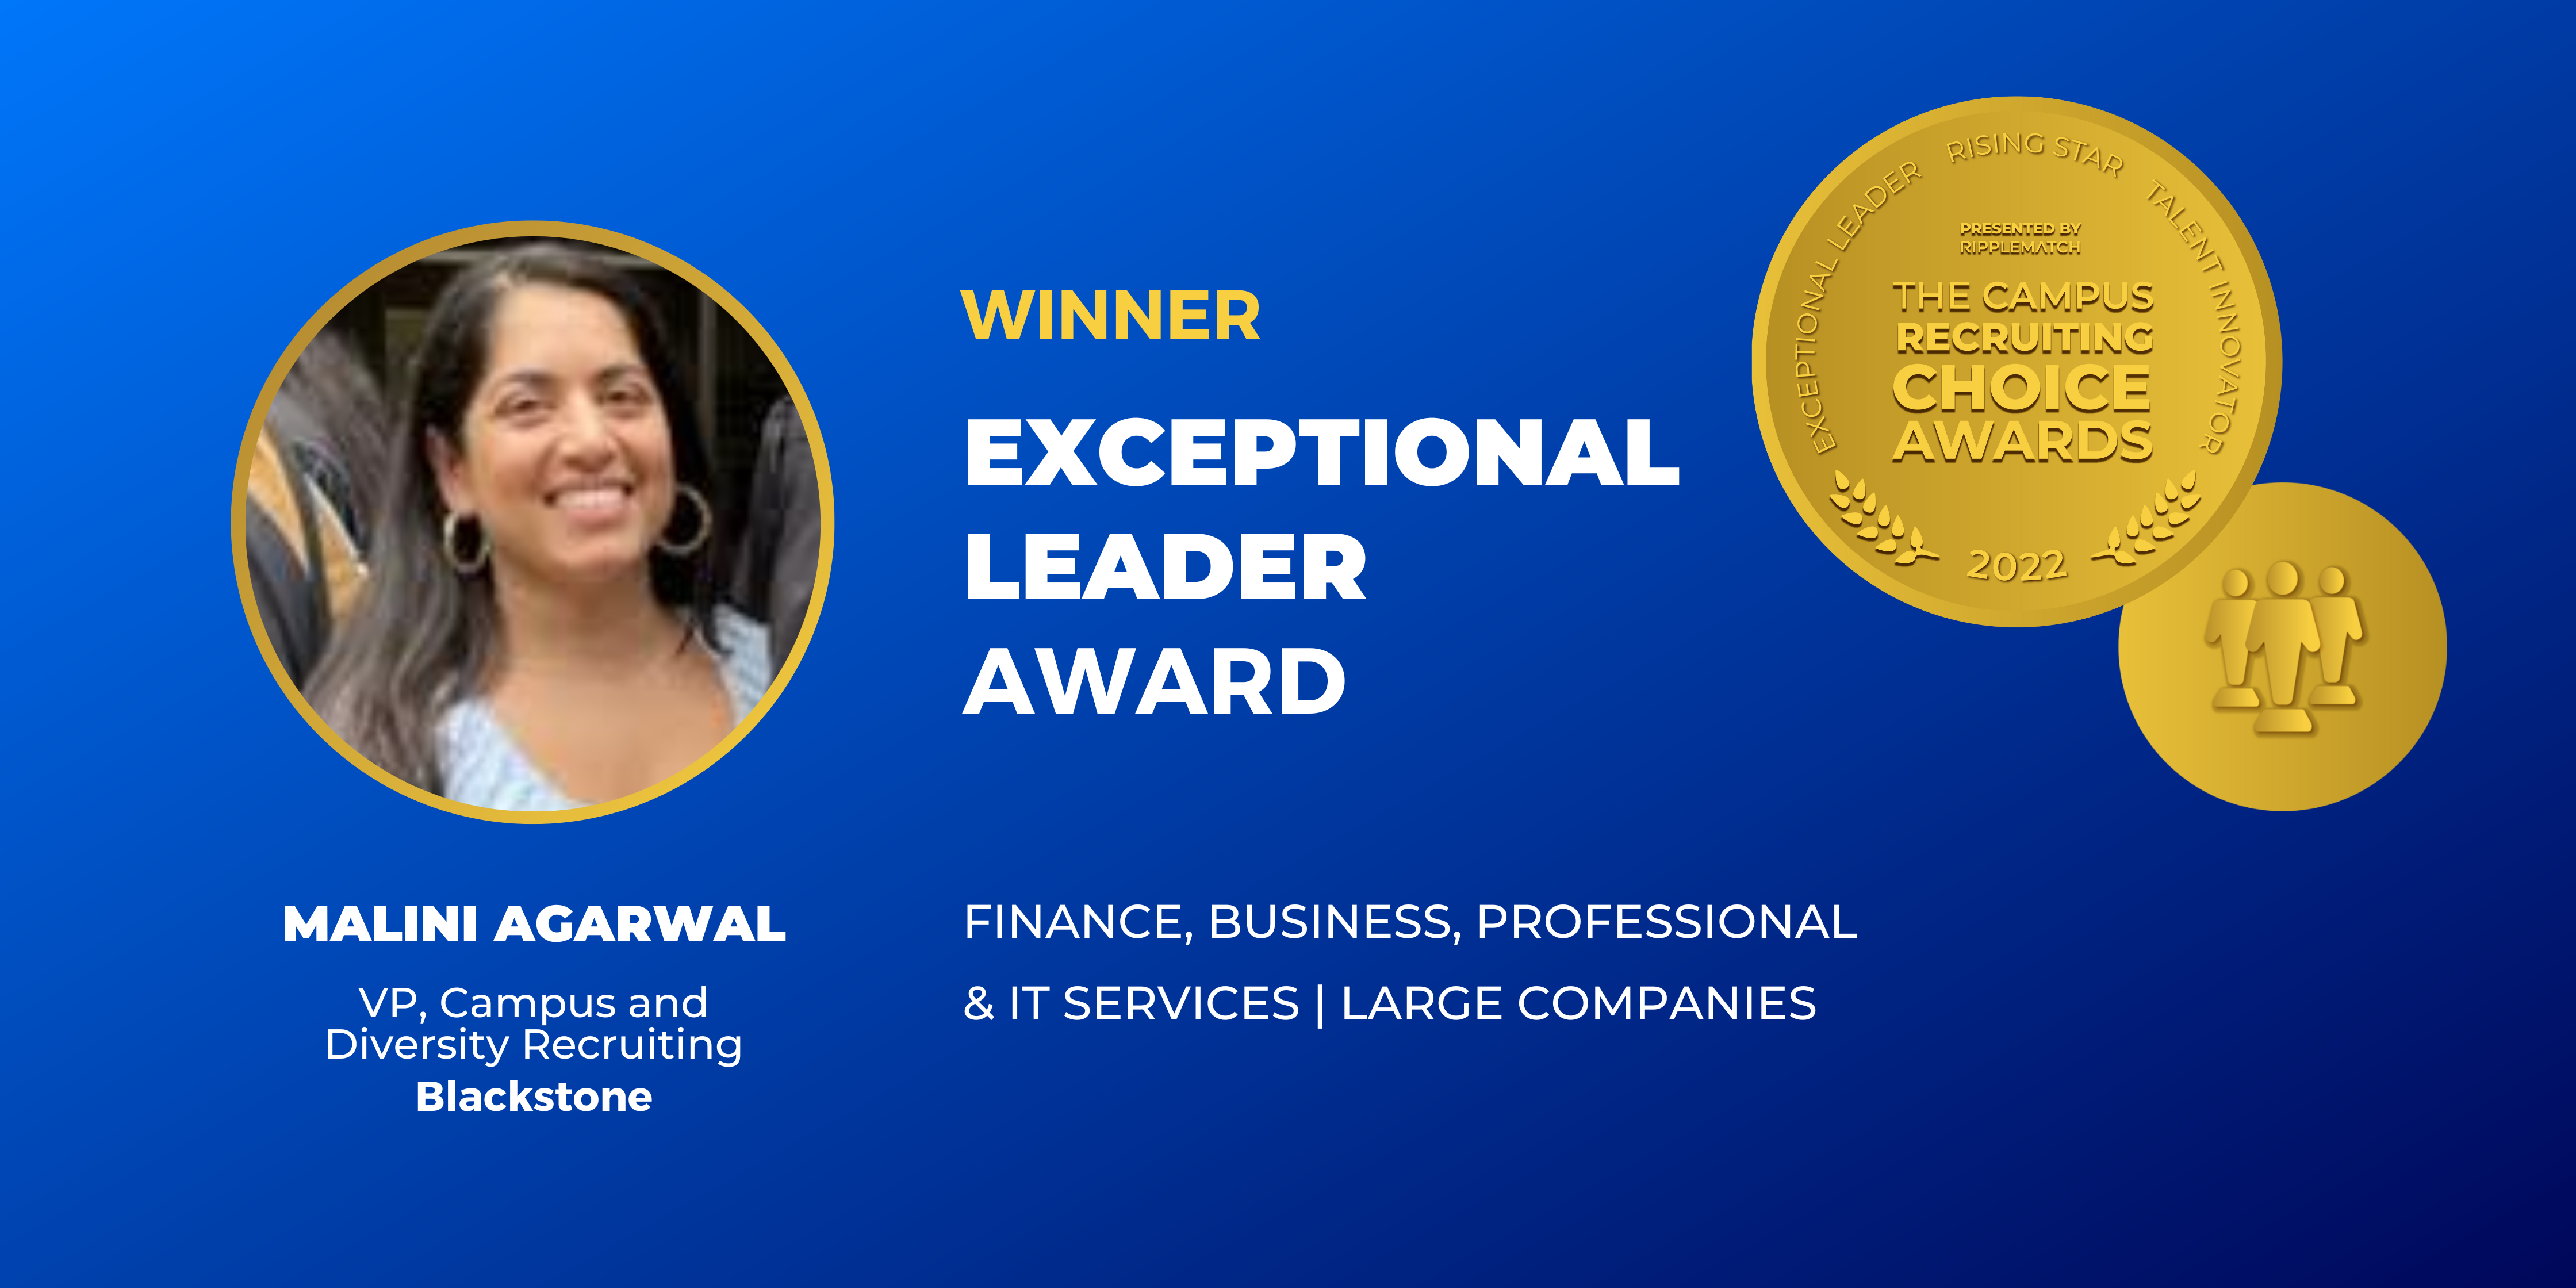 EXCEPTIONAL LEADER - Winner - Finance, Business, Professional & IT Services  Large Companies - Malini Agarwal